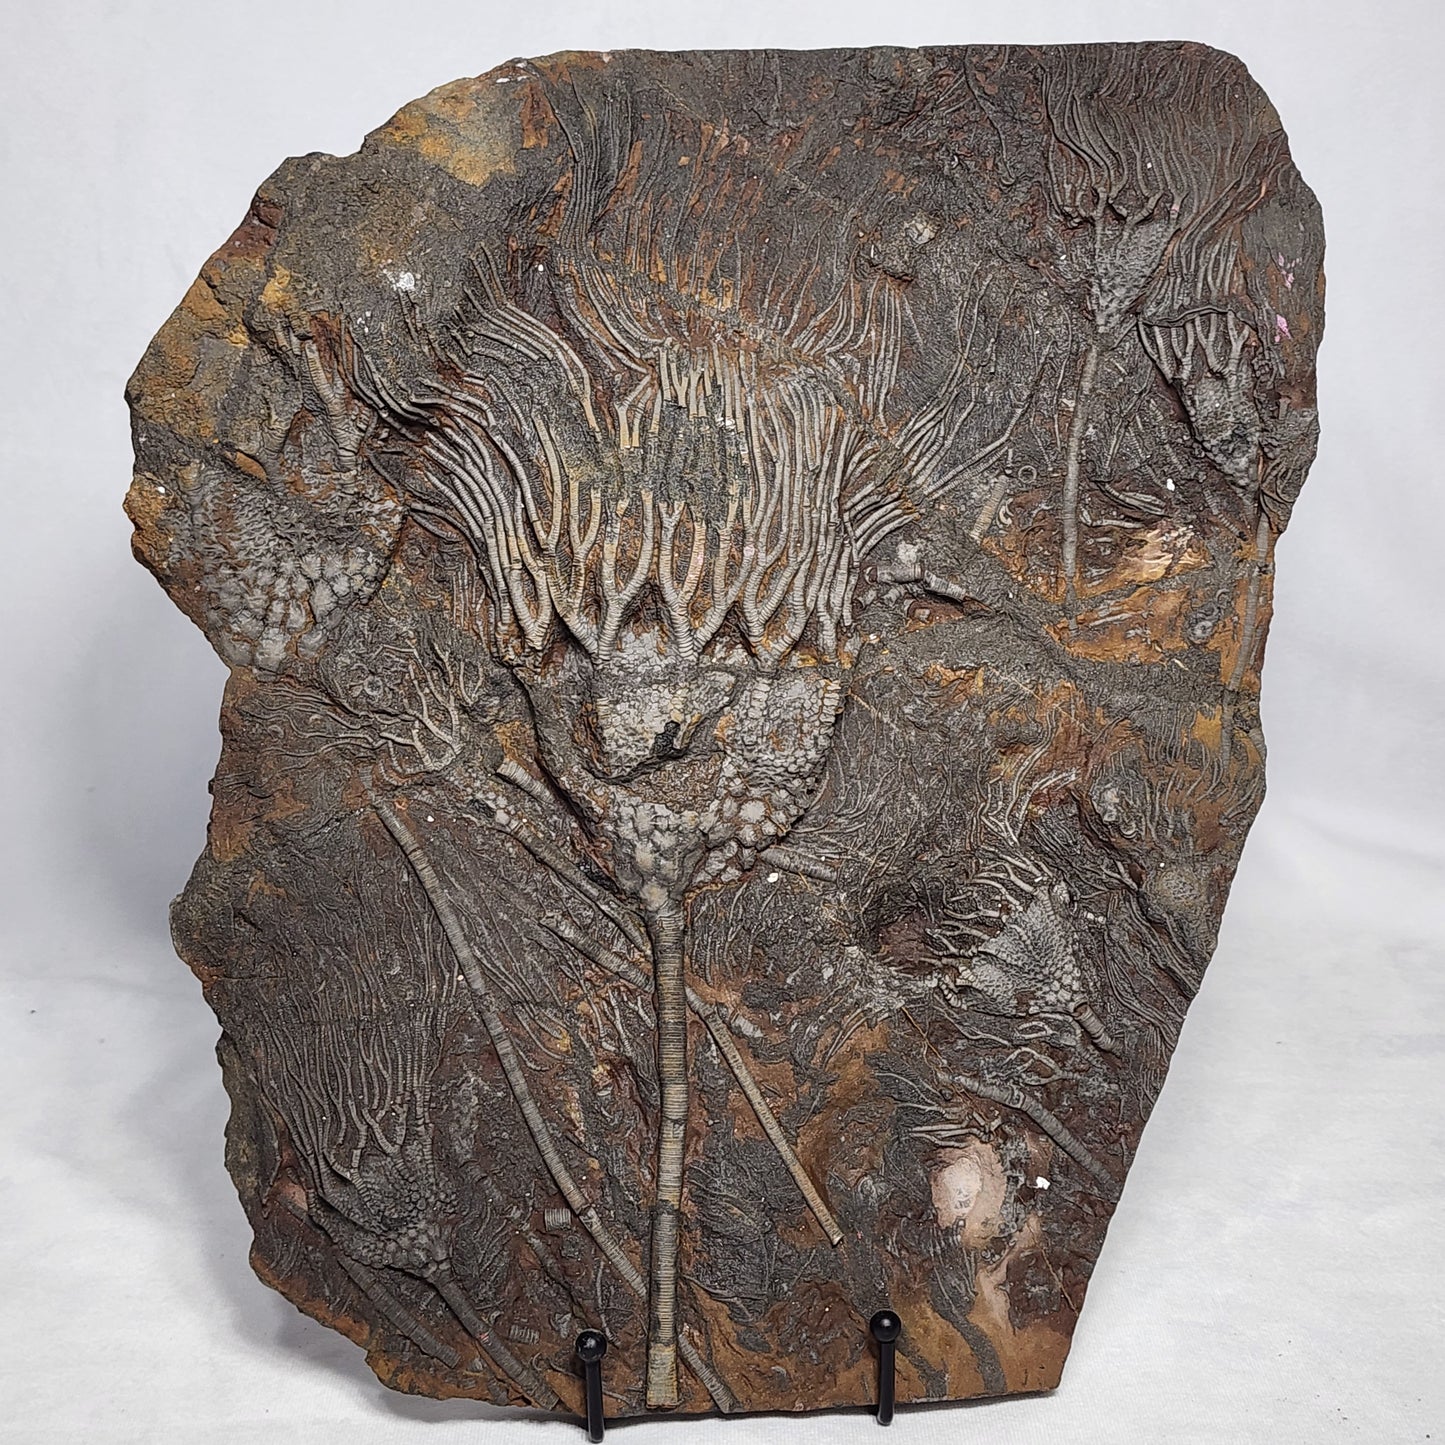 Authentic Crinoid Plate from Morocco